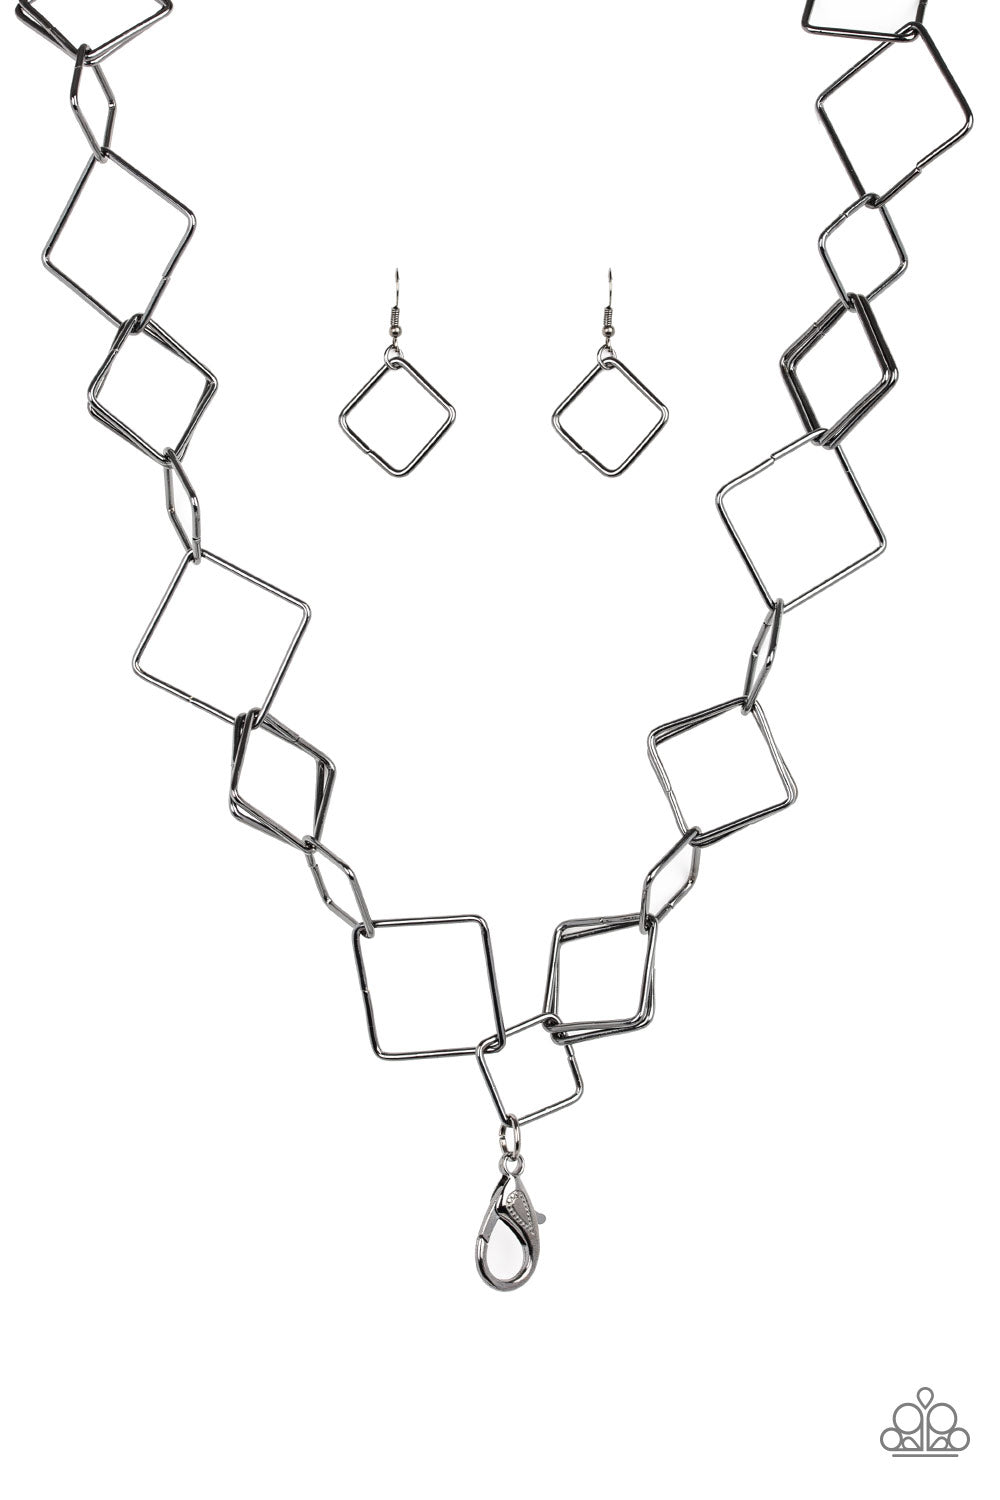 BACKED INTO A CORNER - BLACK GEOMETRIC SQUARES LANYARD NECKLACE